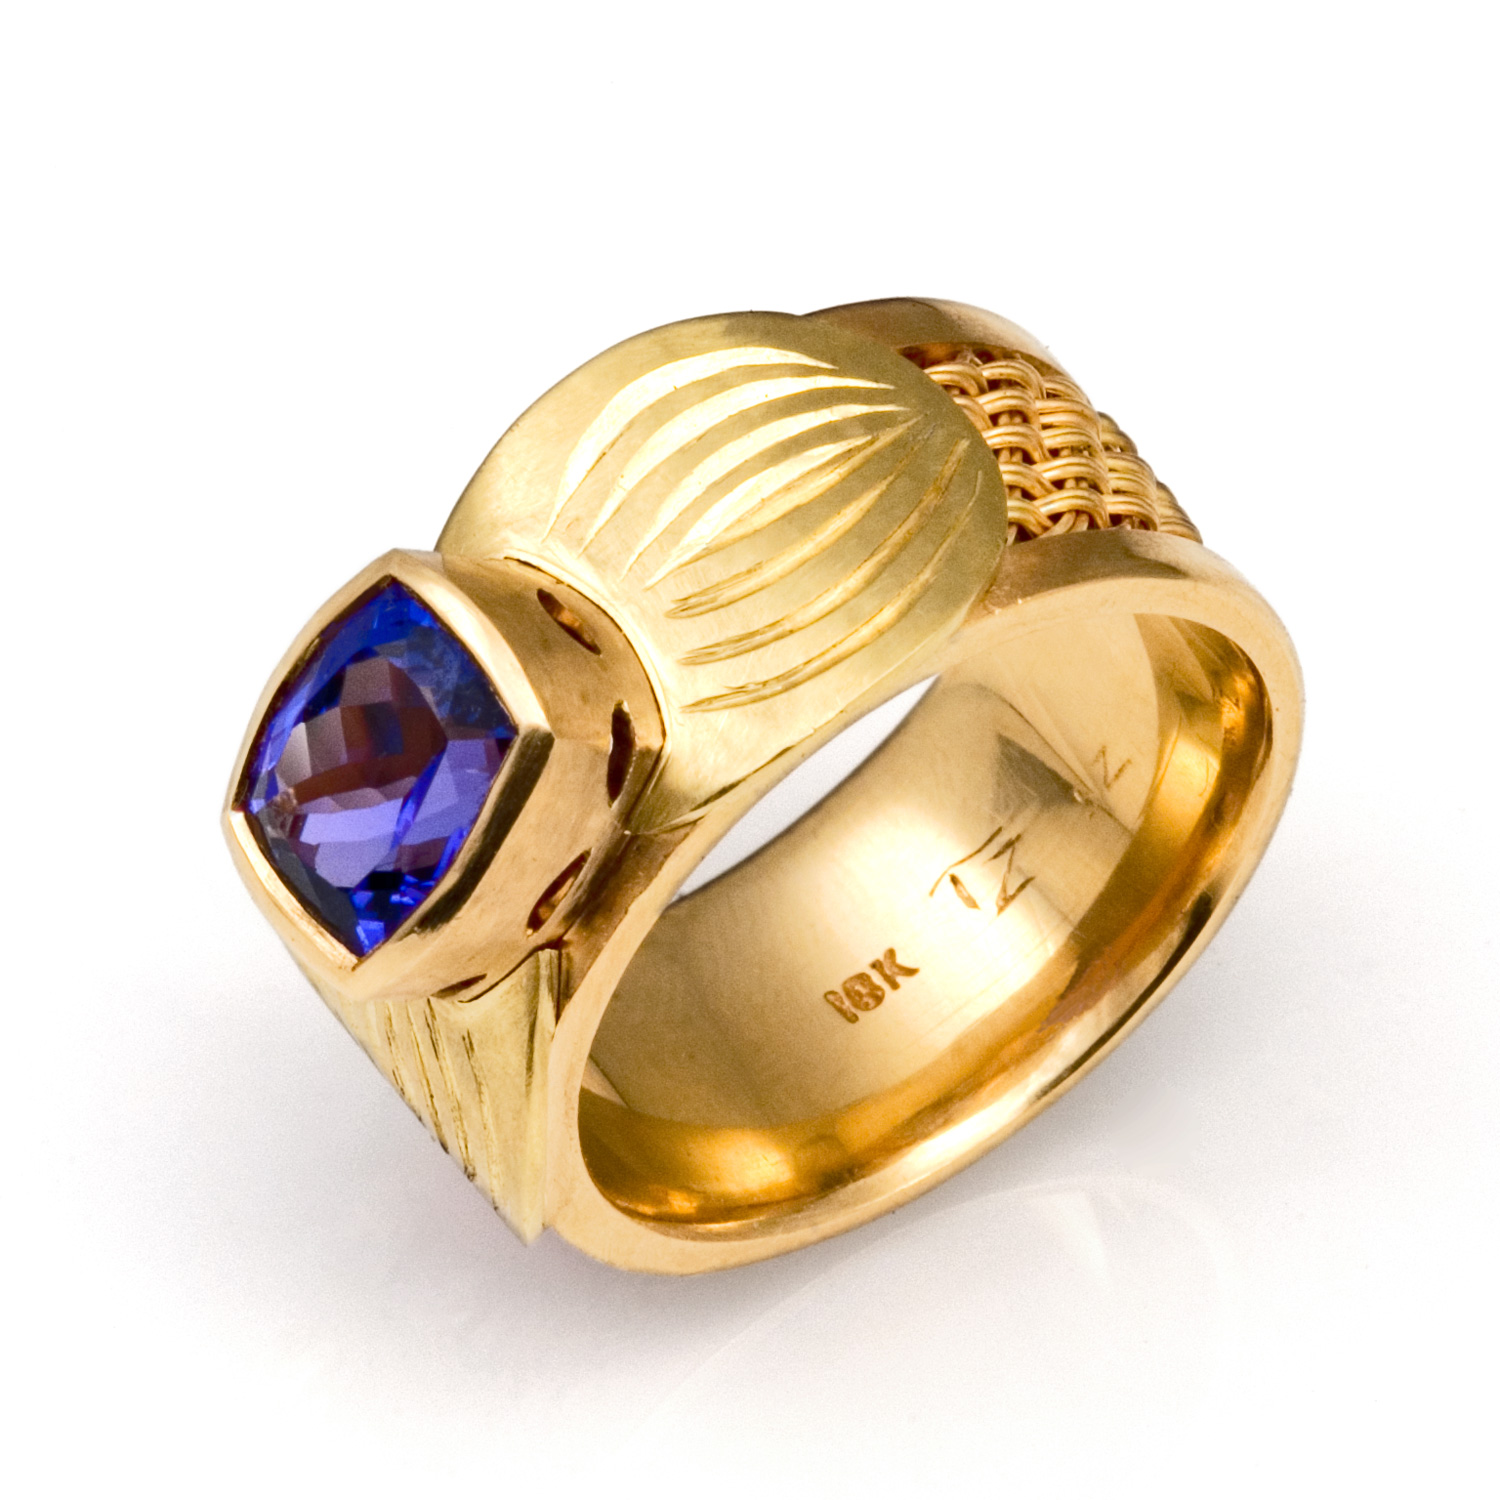 Tanzanite Ring with Inset Weave in 18k yellow gold